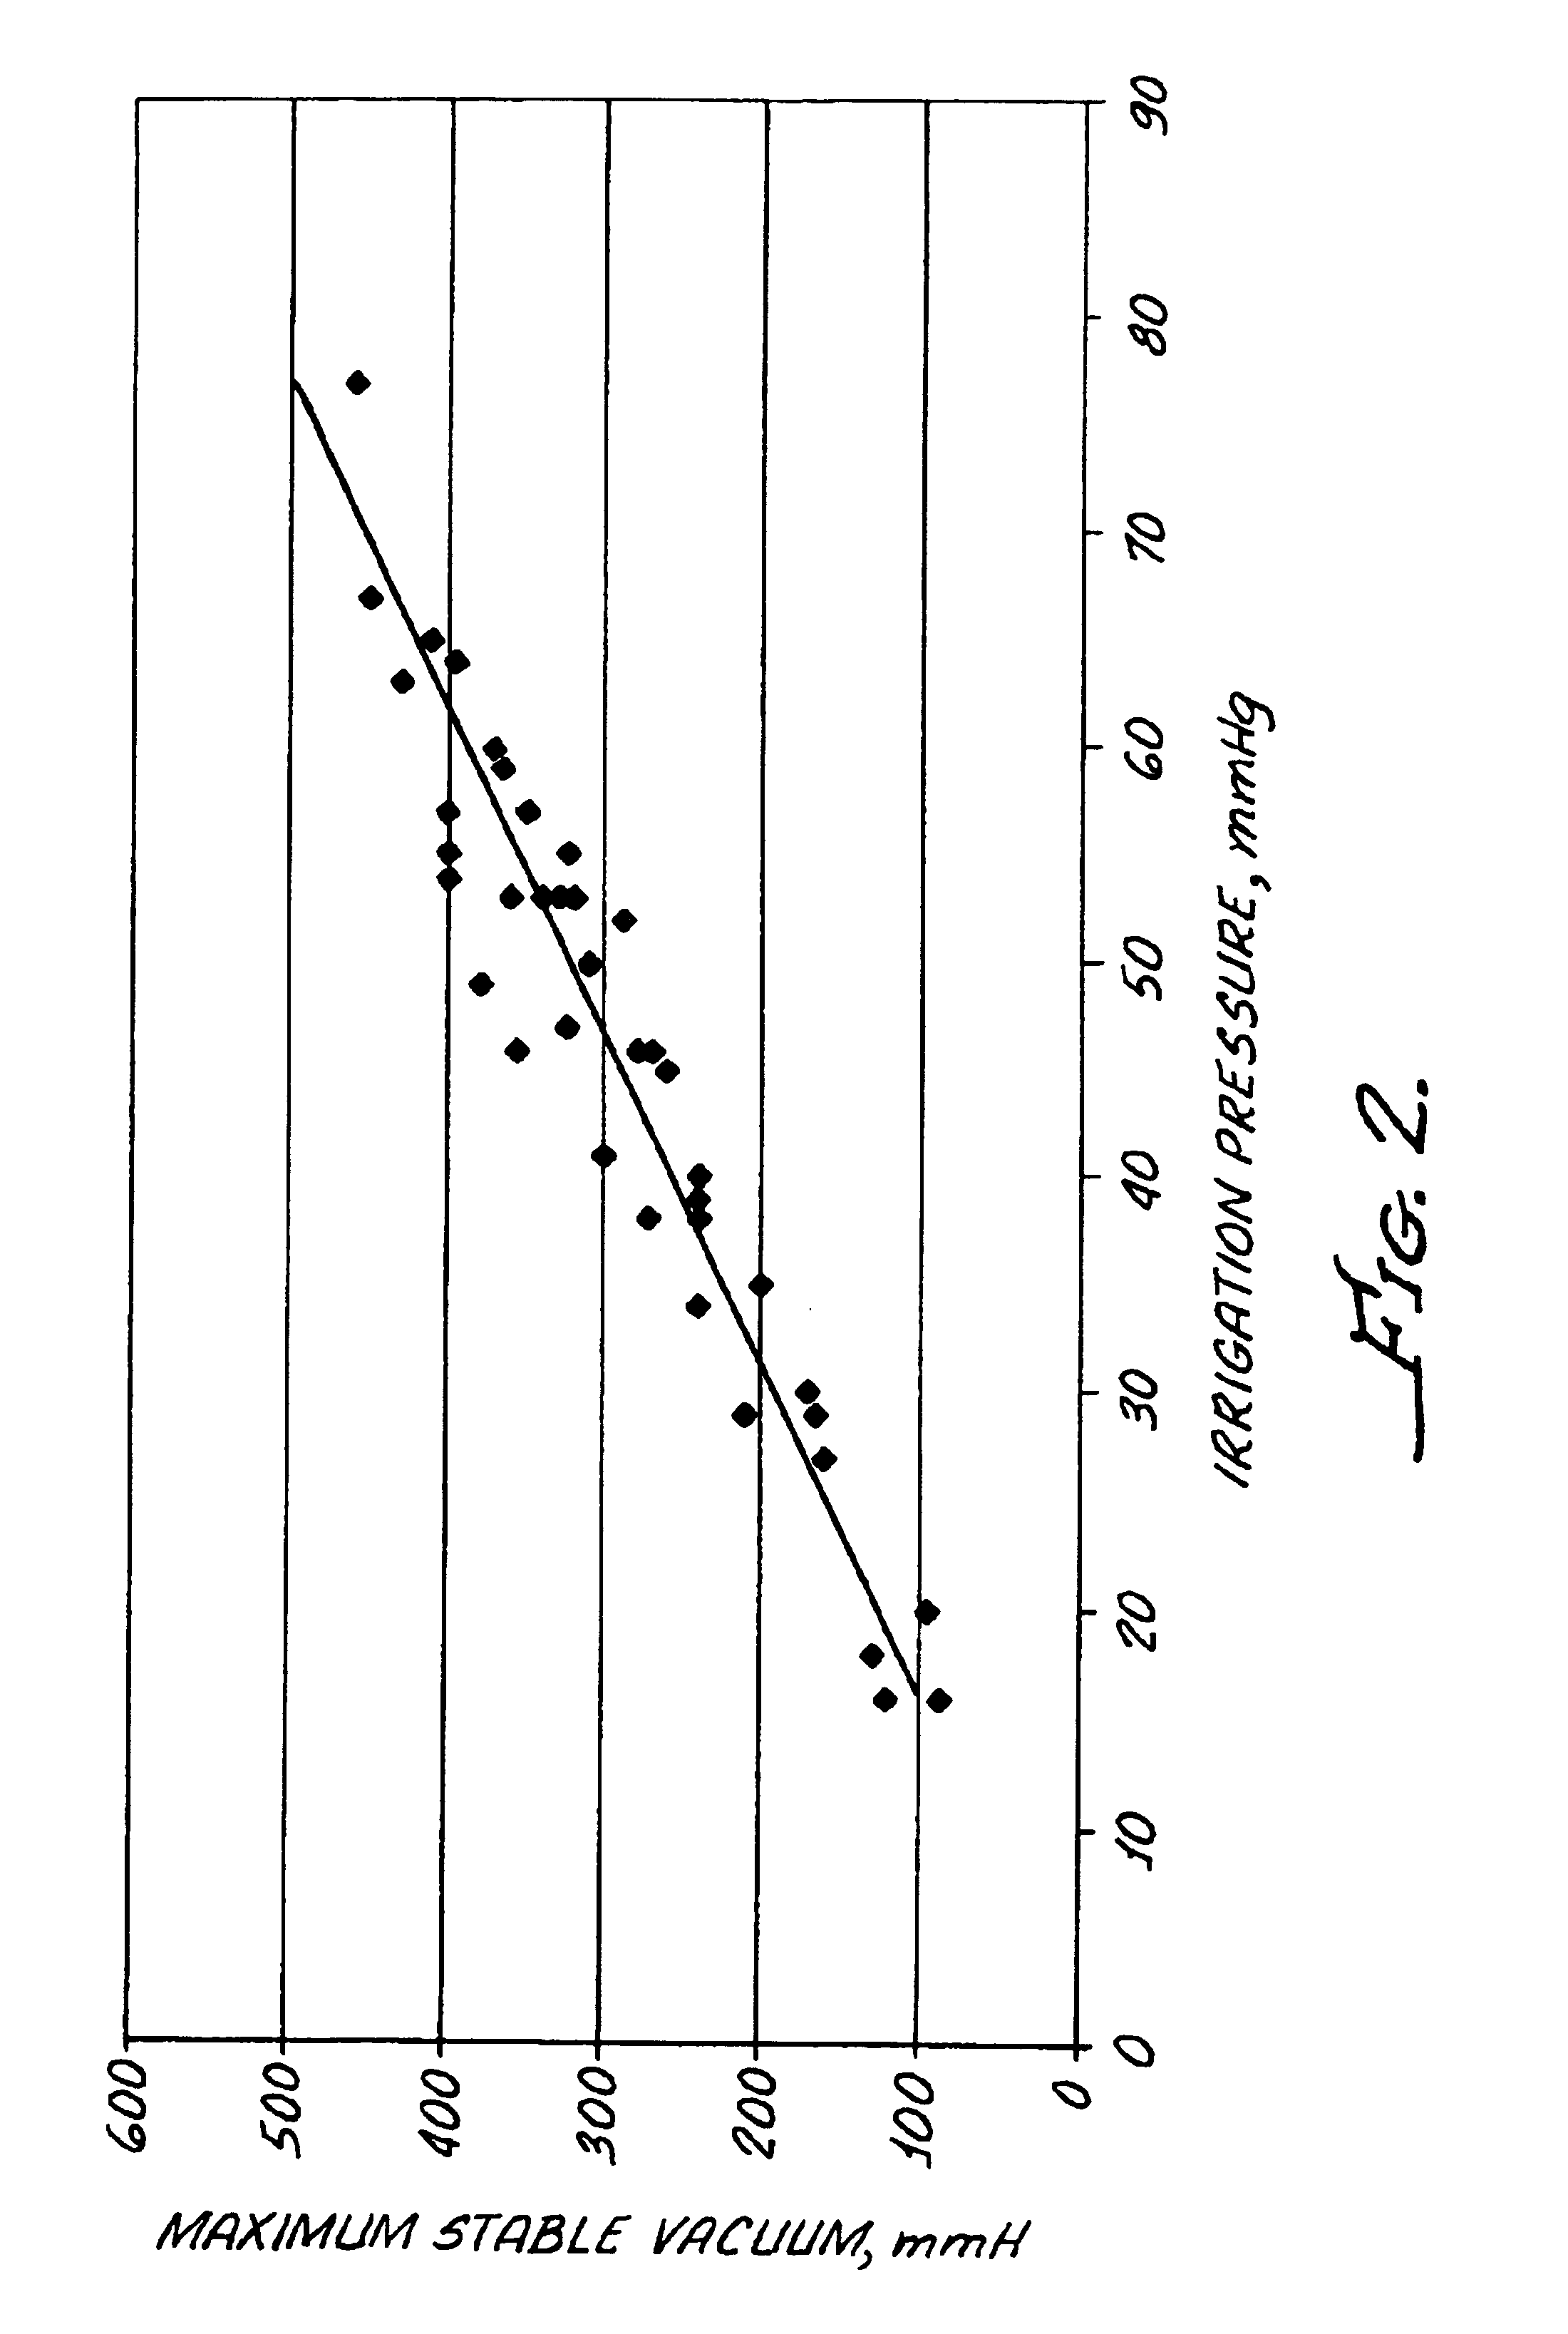 Method for controlling fluid flow to and from an eye during ophthalmic surgery